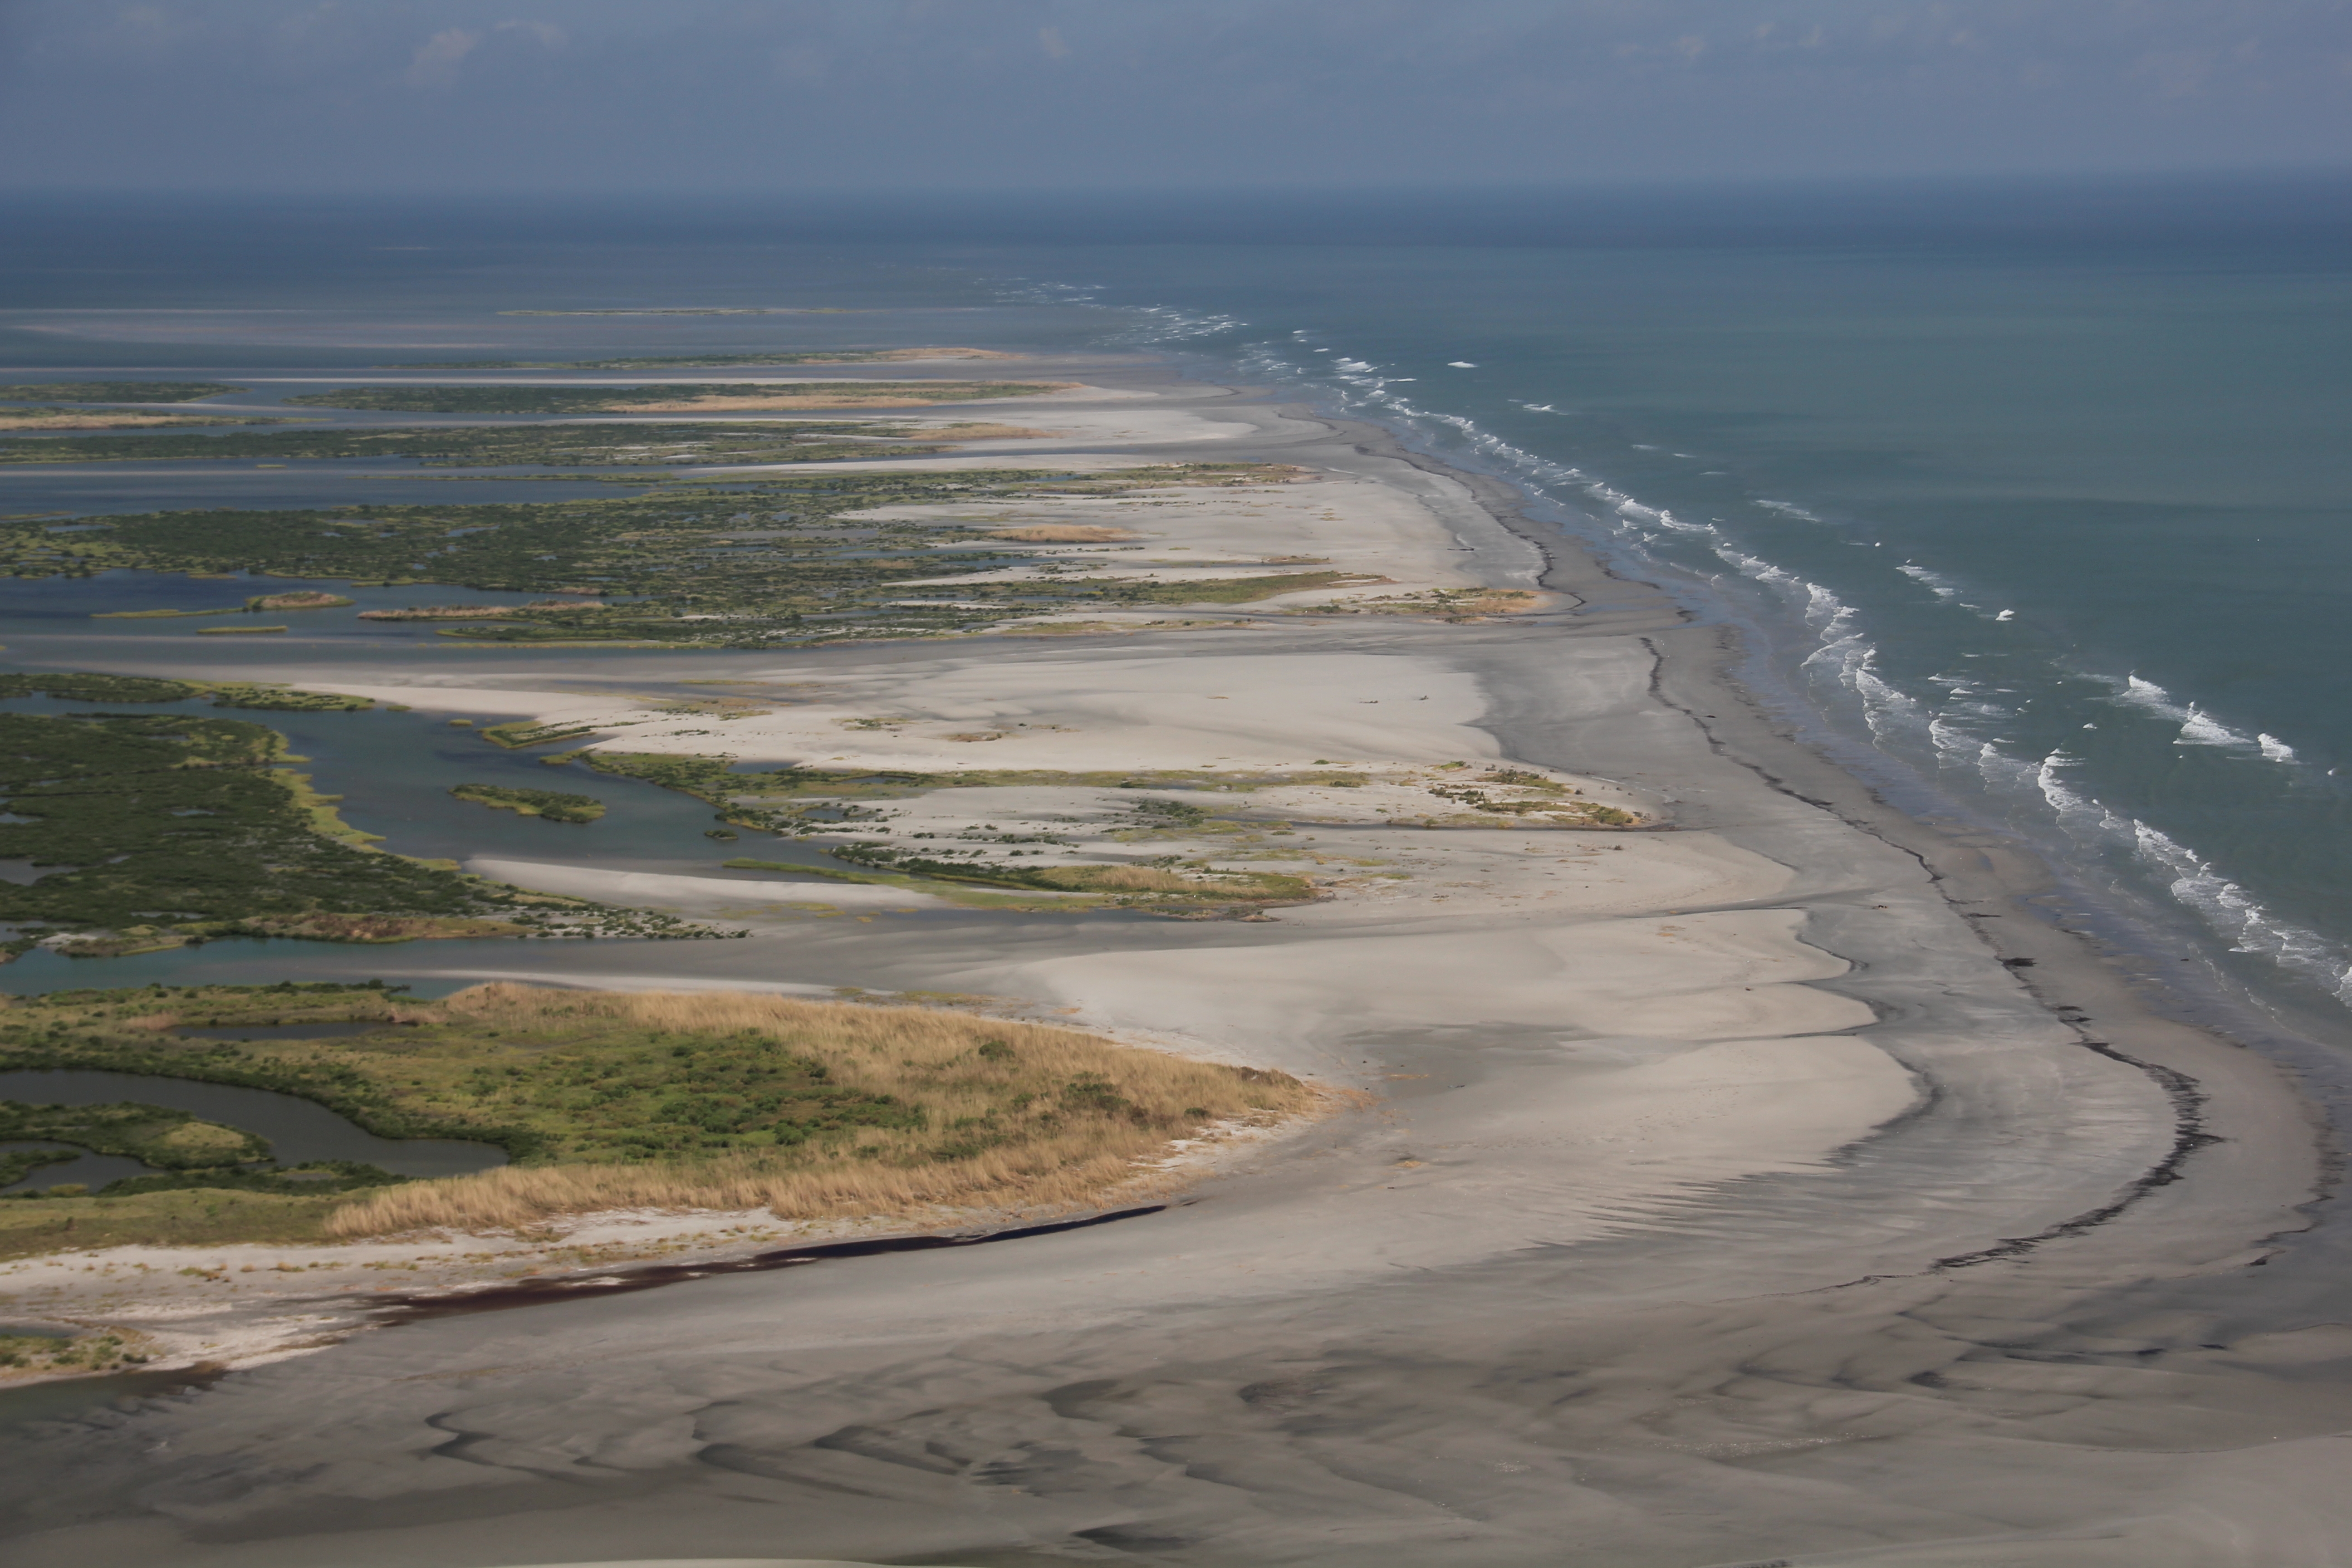 Air photo of eroded beaches and marsh